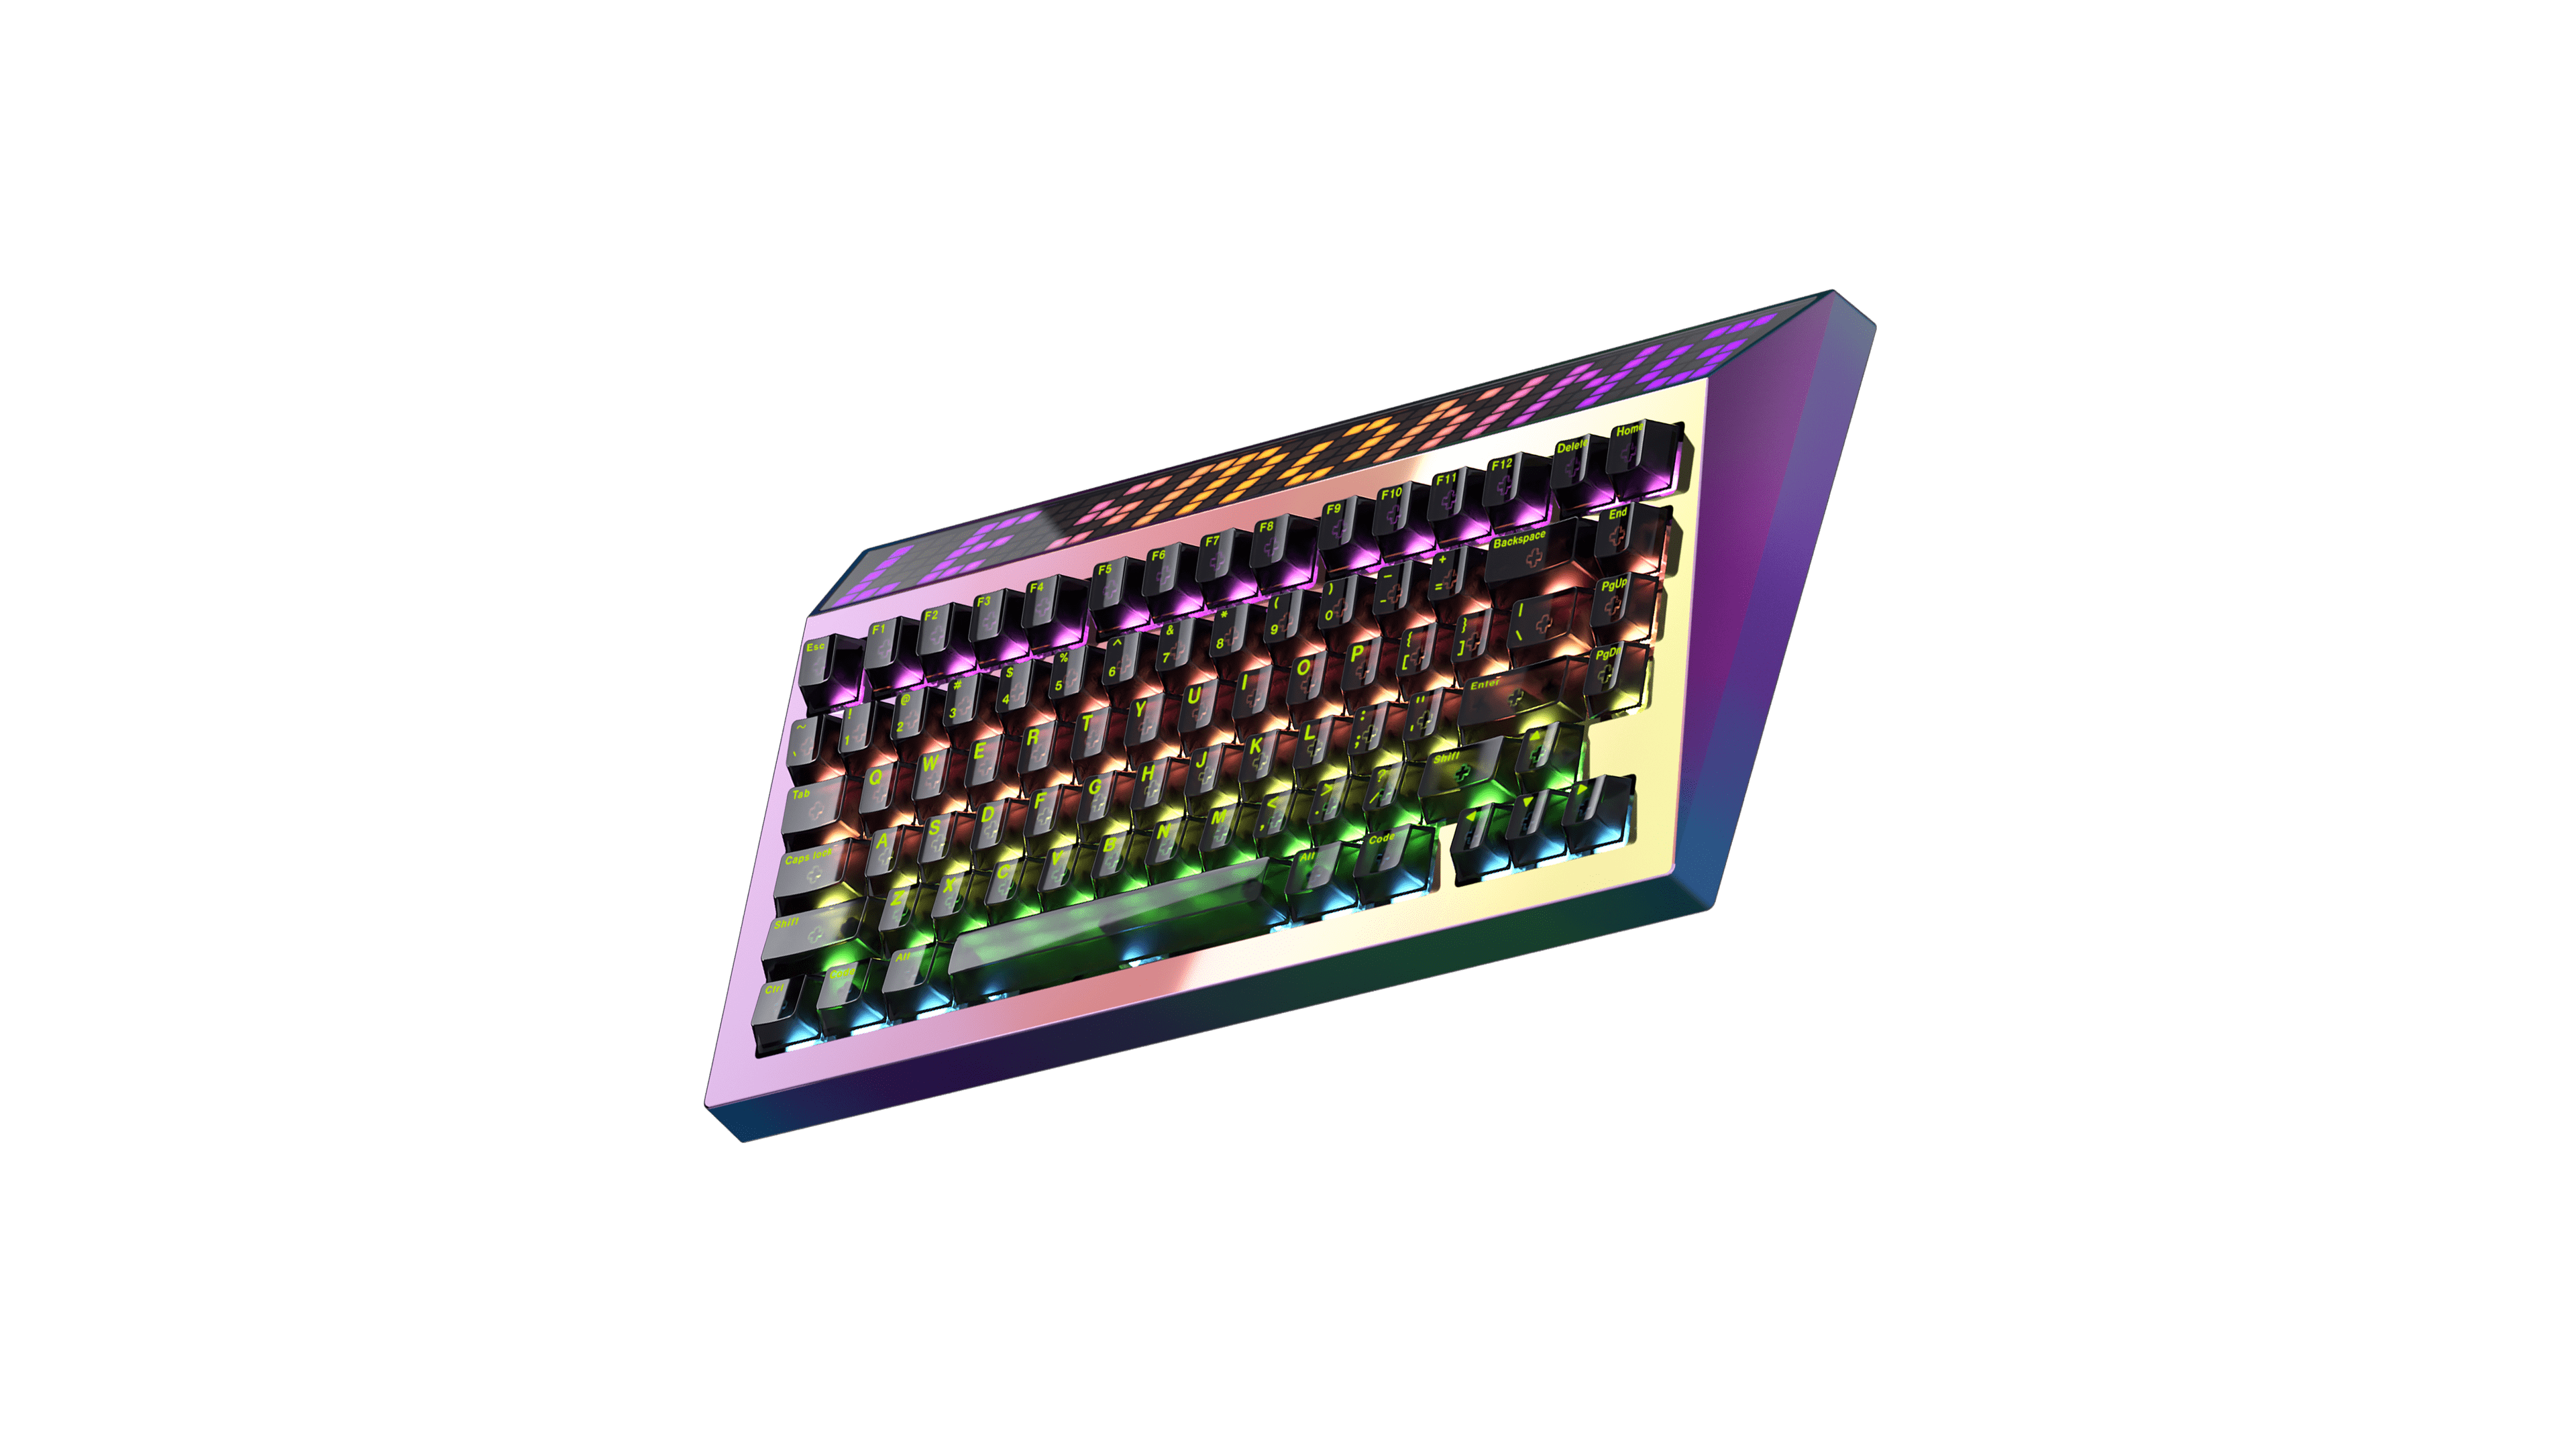 Cyberboard R2 (Psychedelic) by Angry Miao : r/MechanicalKeyboards